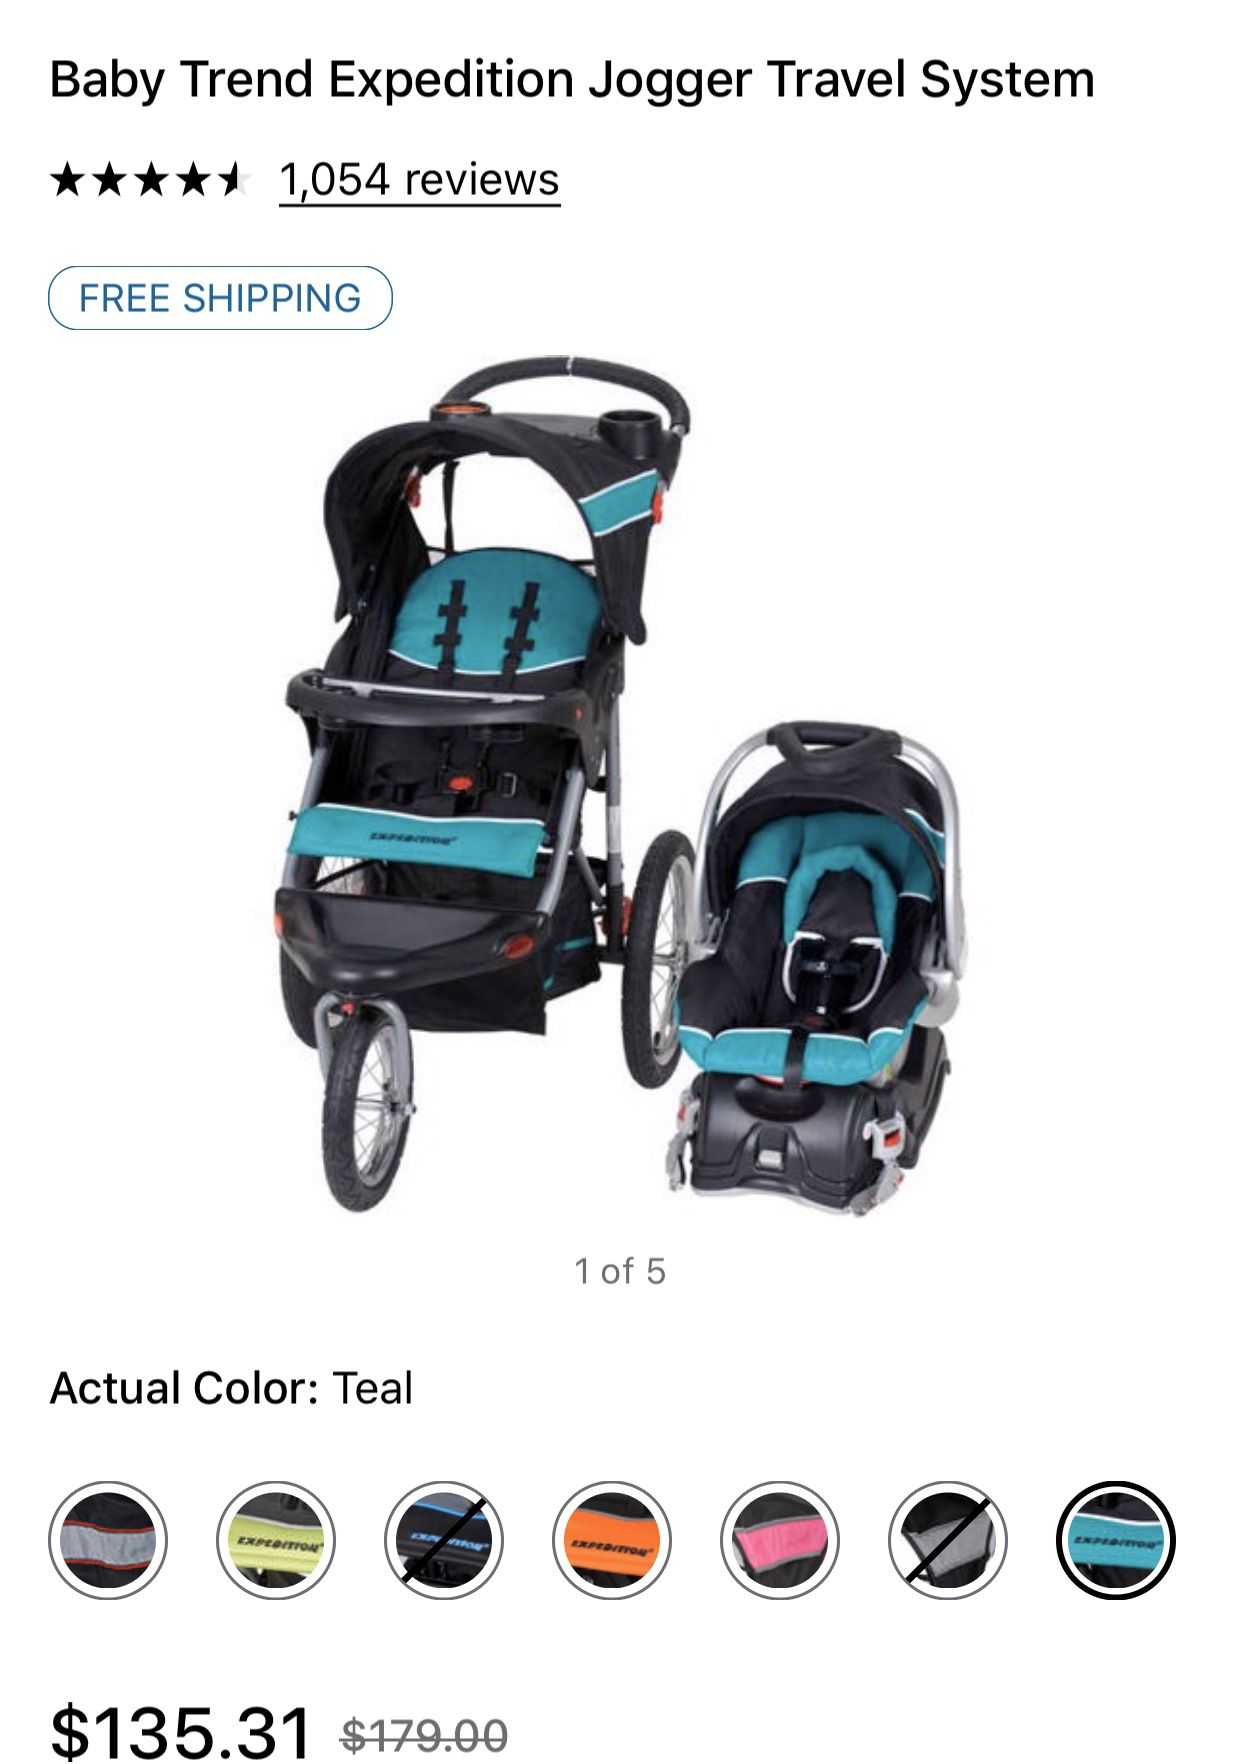 Baby trend expedition